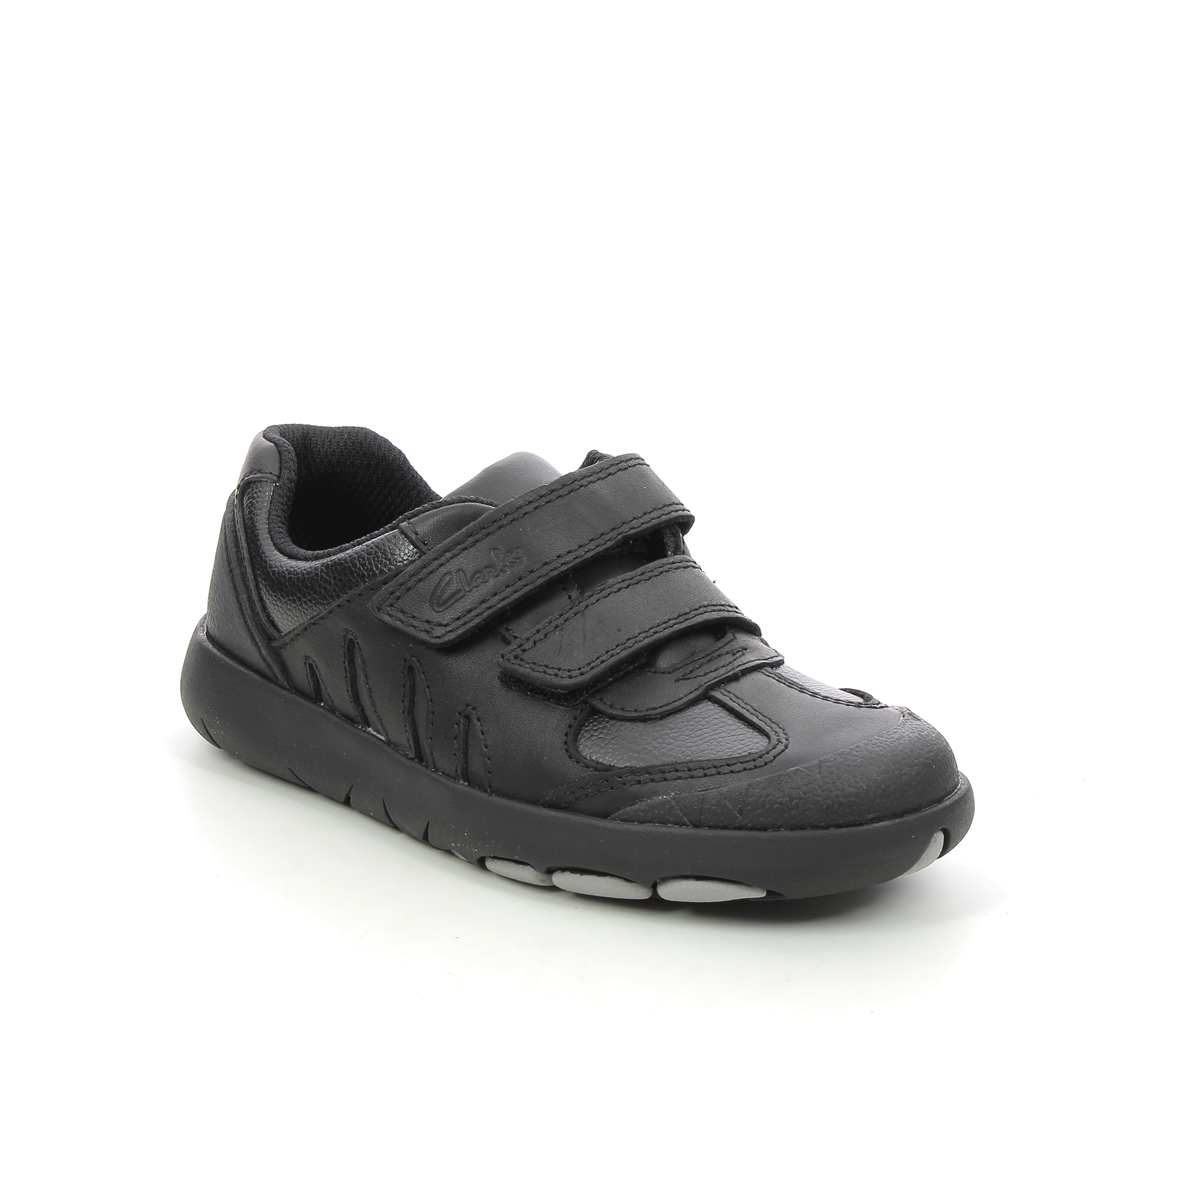 Clarks Rex Stride K Black leather Kids Boys Shoes 6269-88H in a Plain Leather in Size 10.5